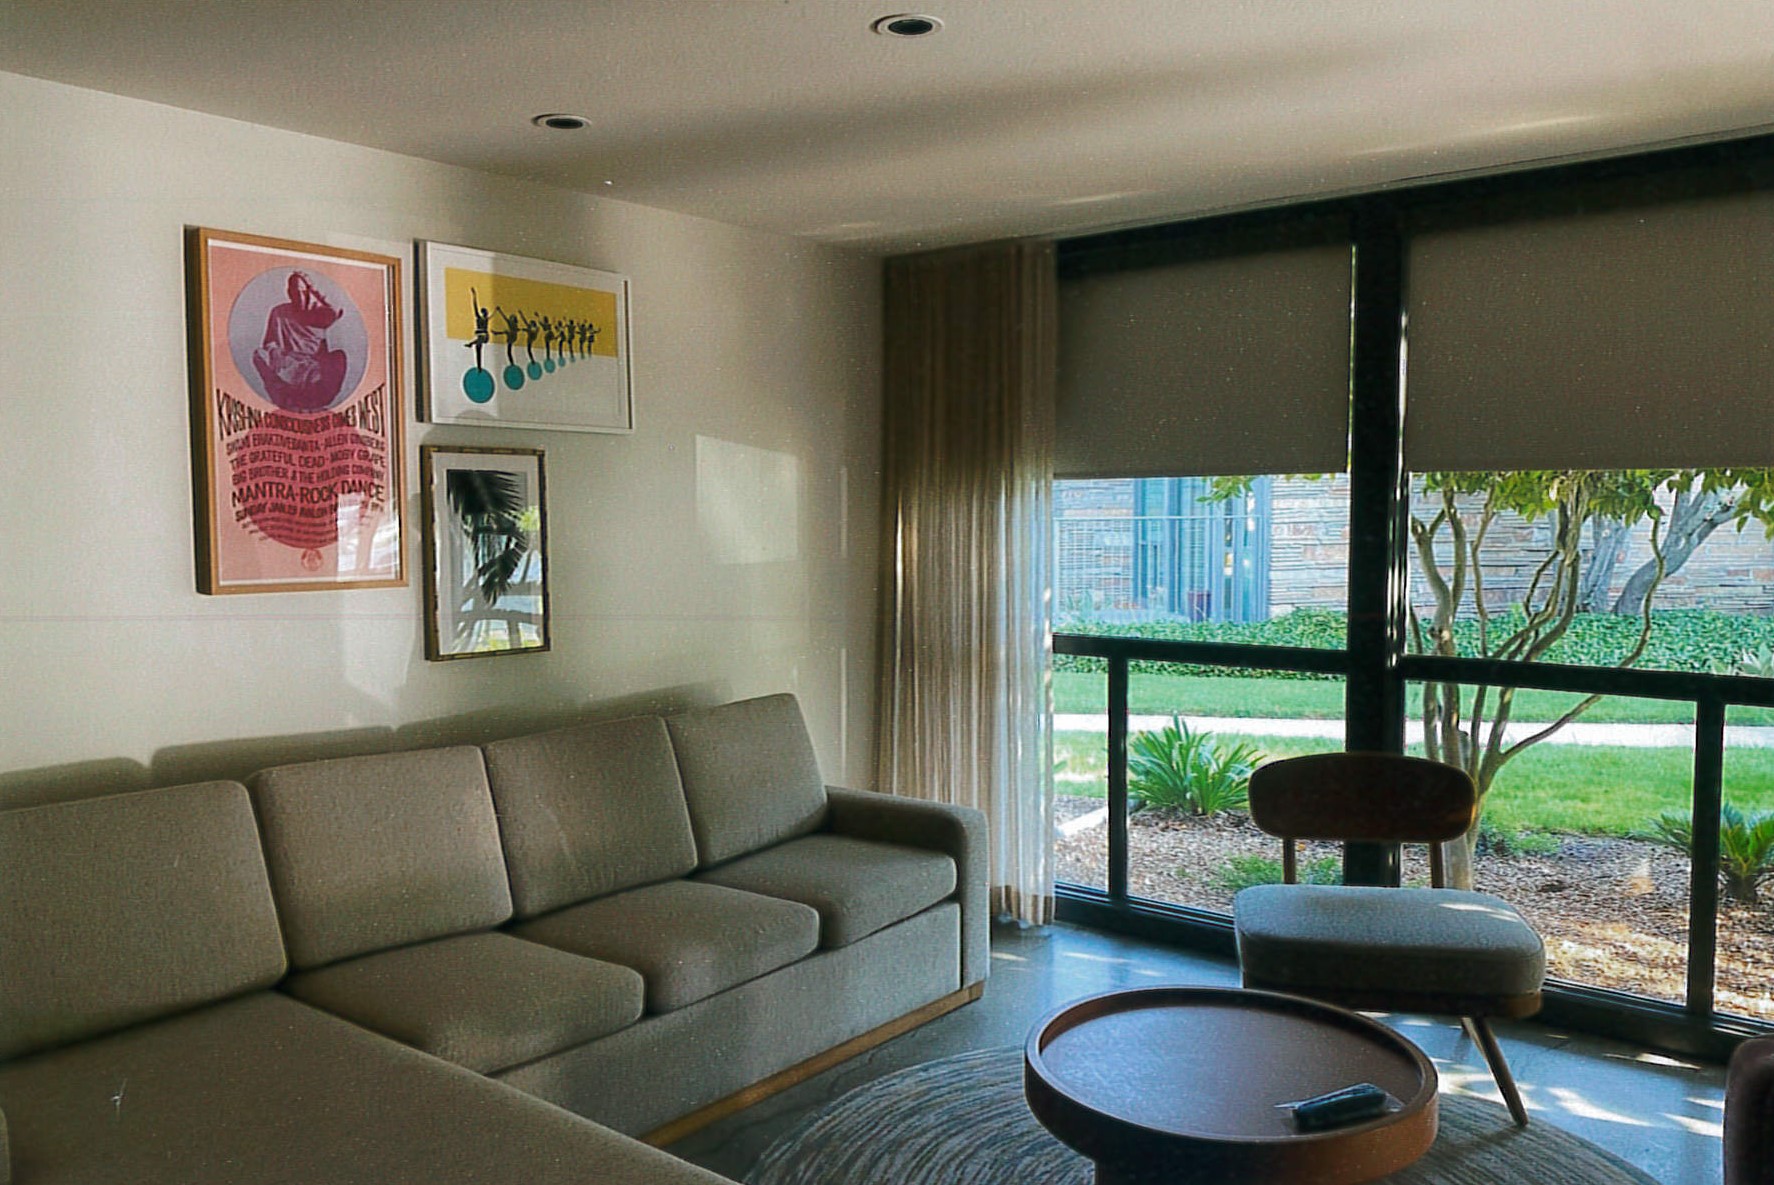 Renovated resort room seating area